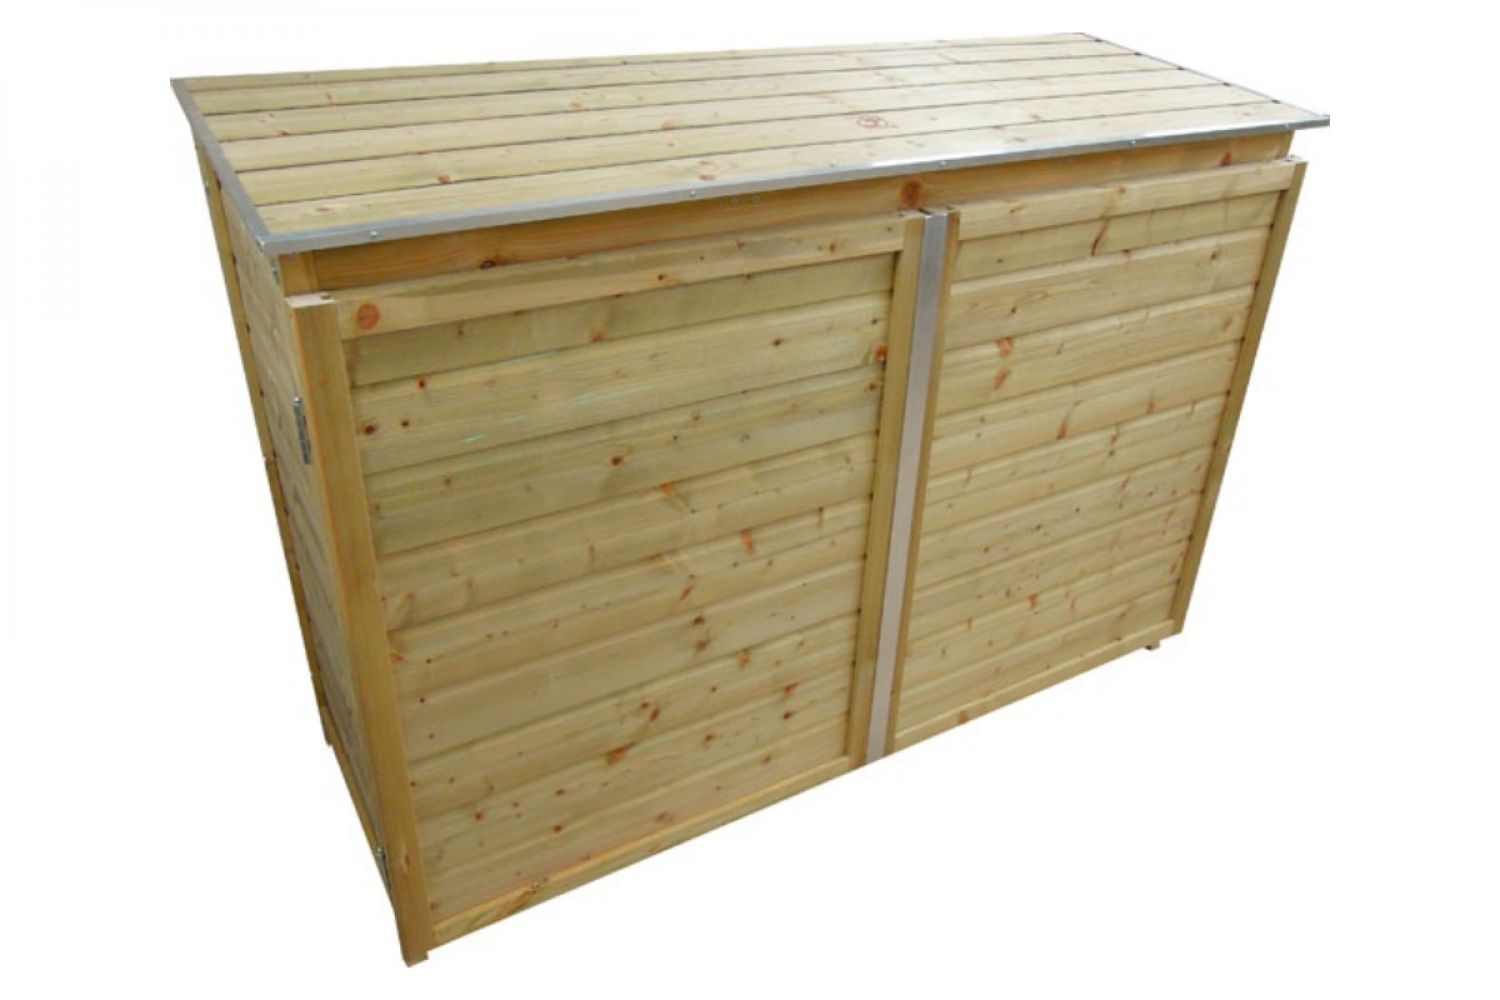 LK120TRIO-R Containerberging | 176x65x111,5 cm - voor 3 containers!